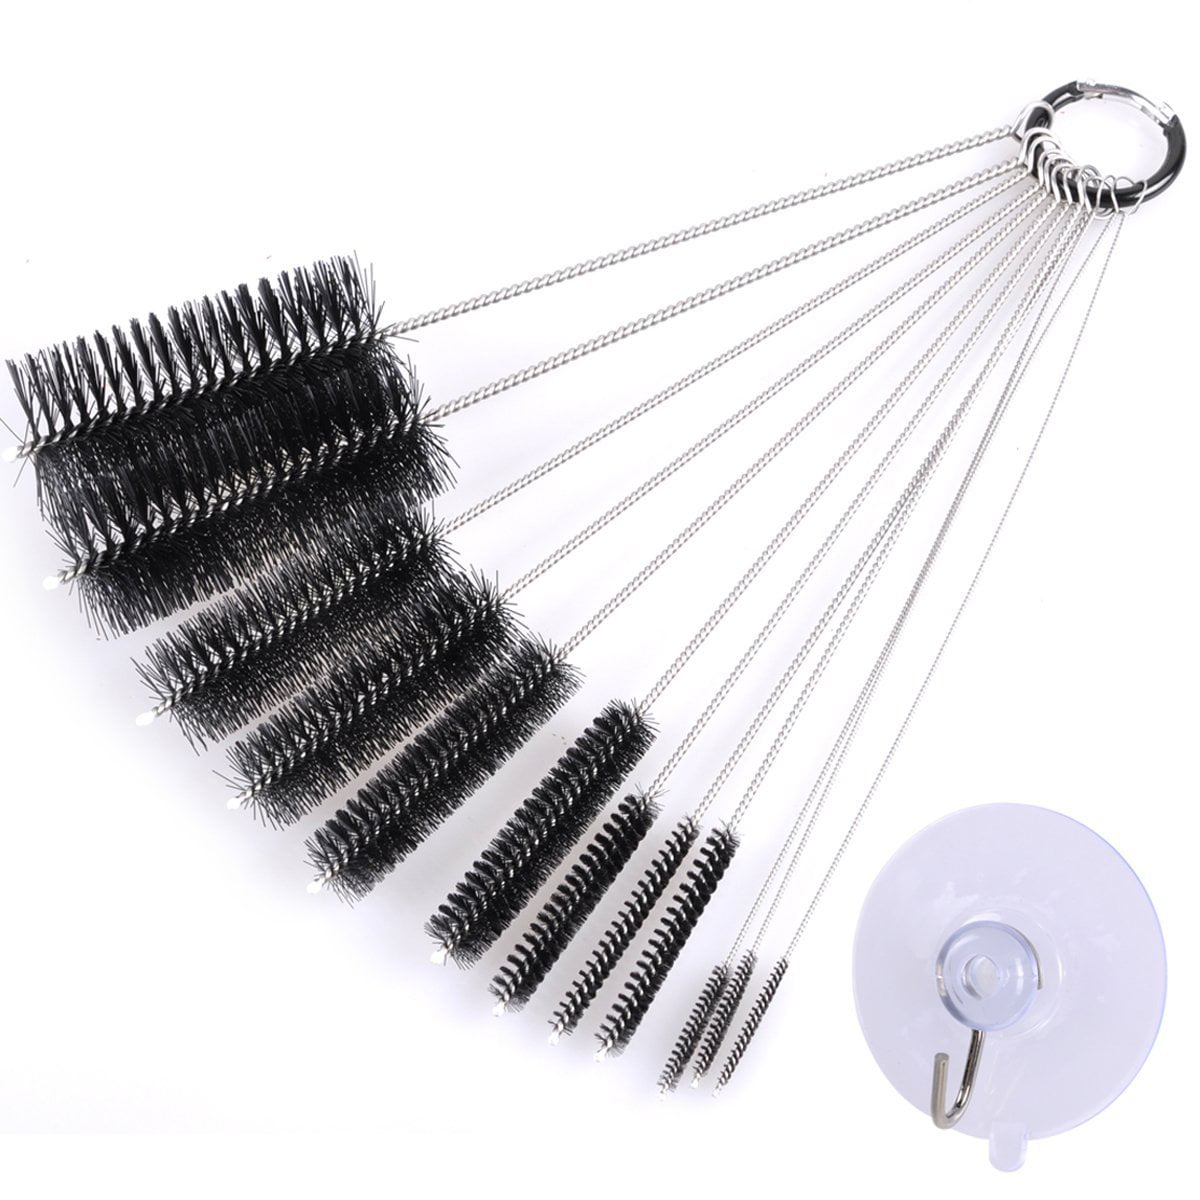 eZAKKA 9.8 Inch 12 Pieces Nylon Tube Brush Pipe Cleaning Brush with Protective Cap for Drinking Straws Glasses Keyboards Jewelry Cleaning with 45mm Transparent Suction Cup Hook Black 